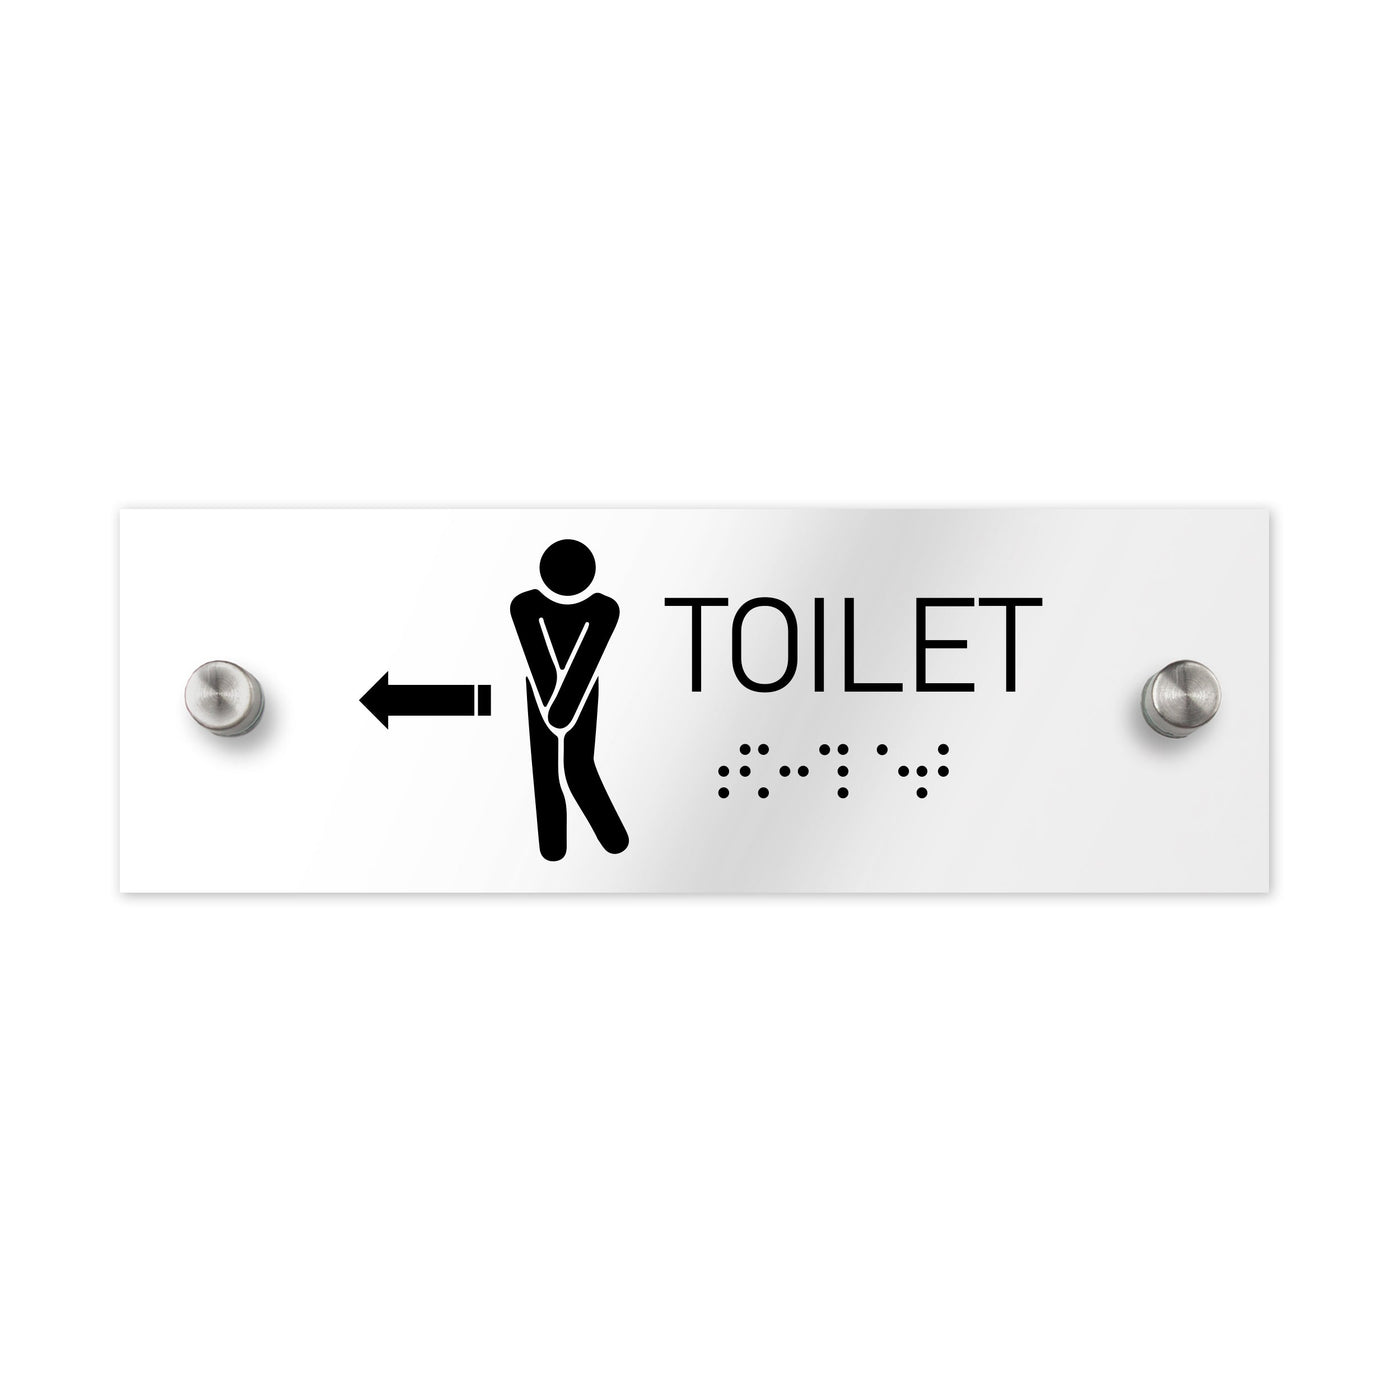 Bathroom Signs - Men Toilet ADA Signs With Braille - Clear Acrylic